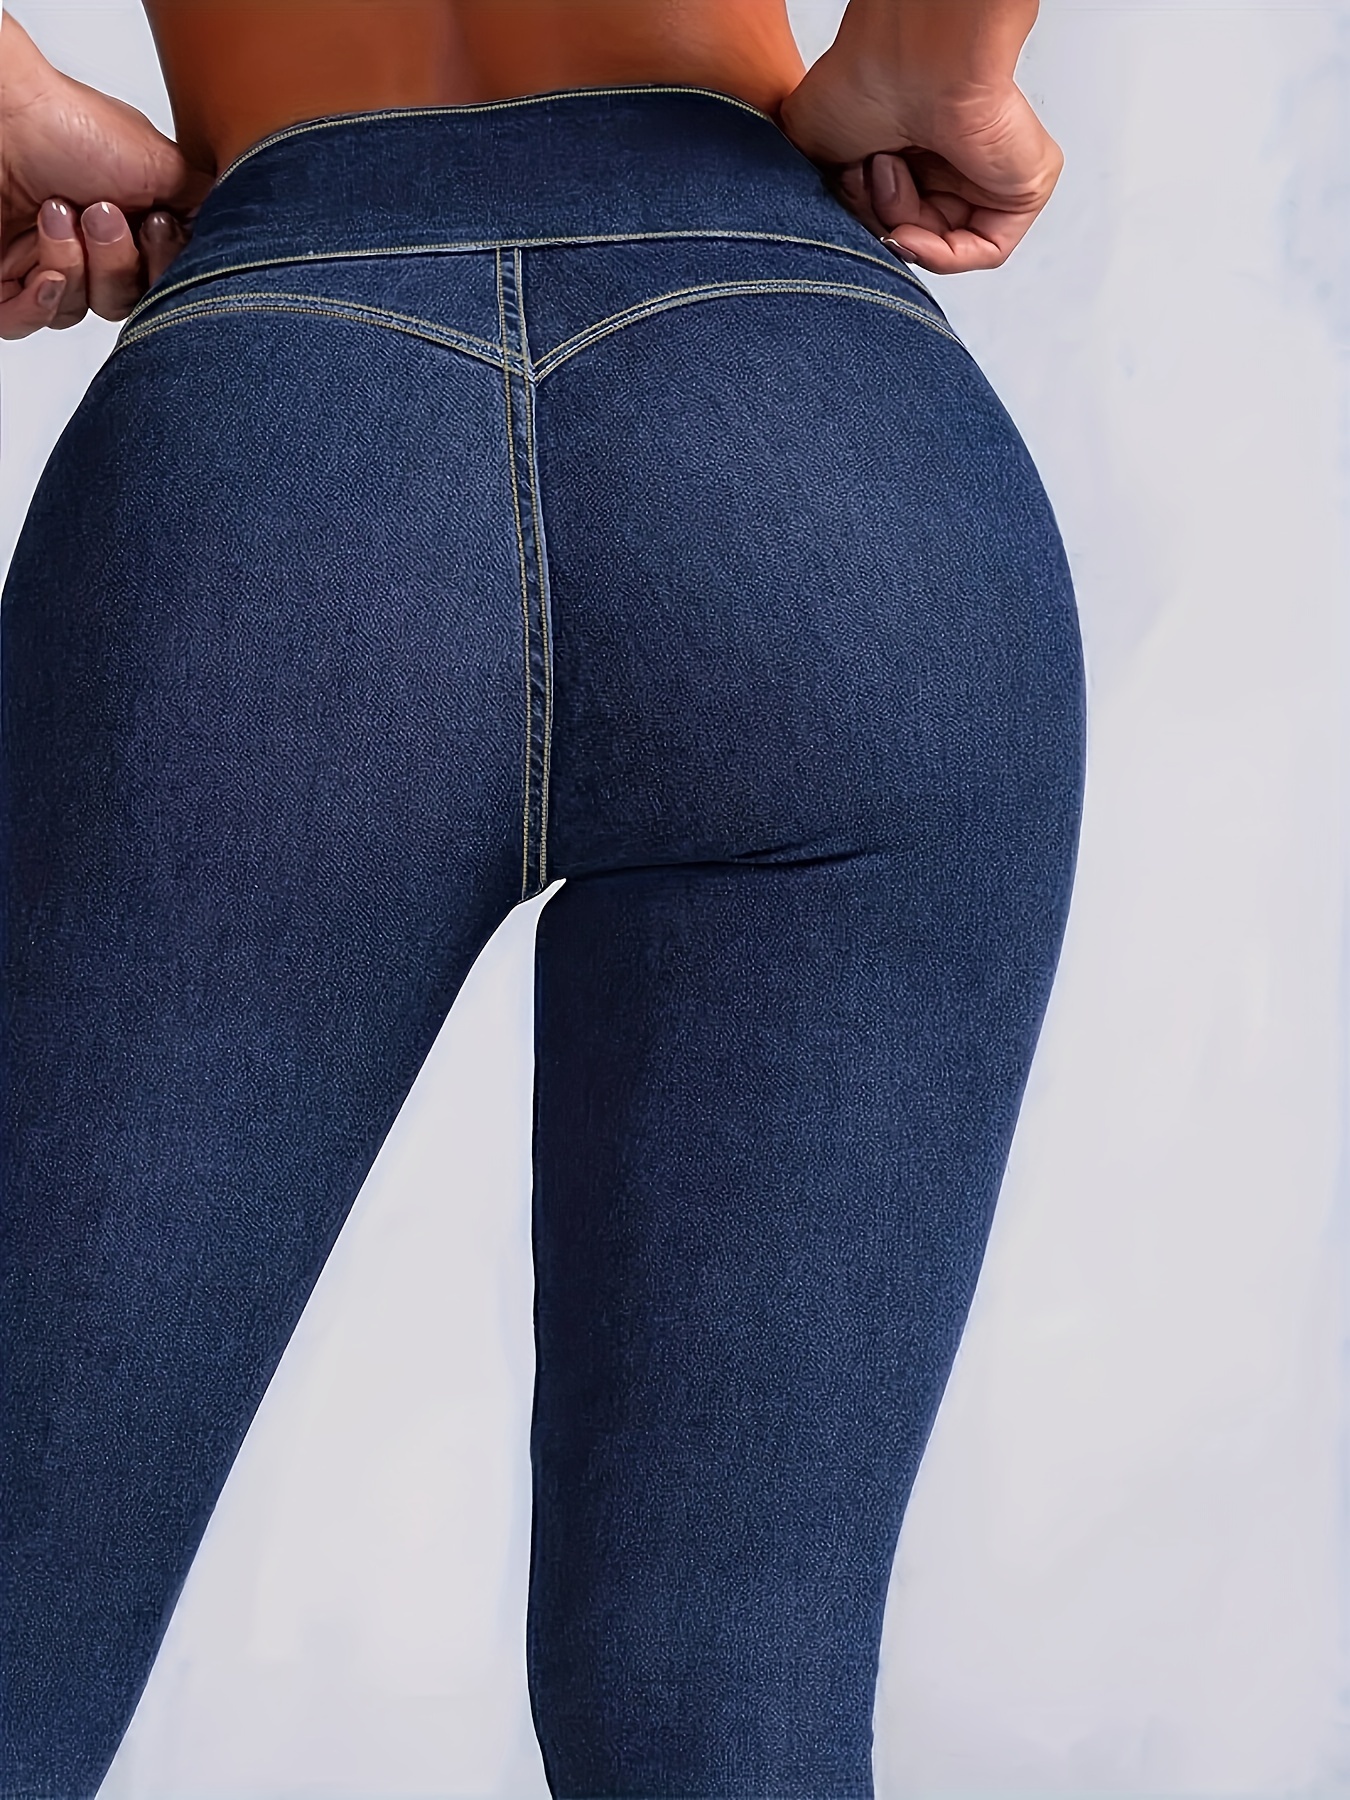 High Waist Stretch Jean Jeggings for Women Slim Fit Tummy Control